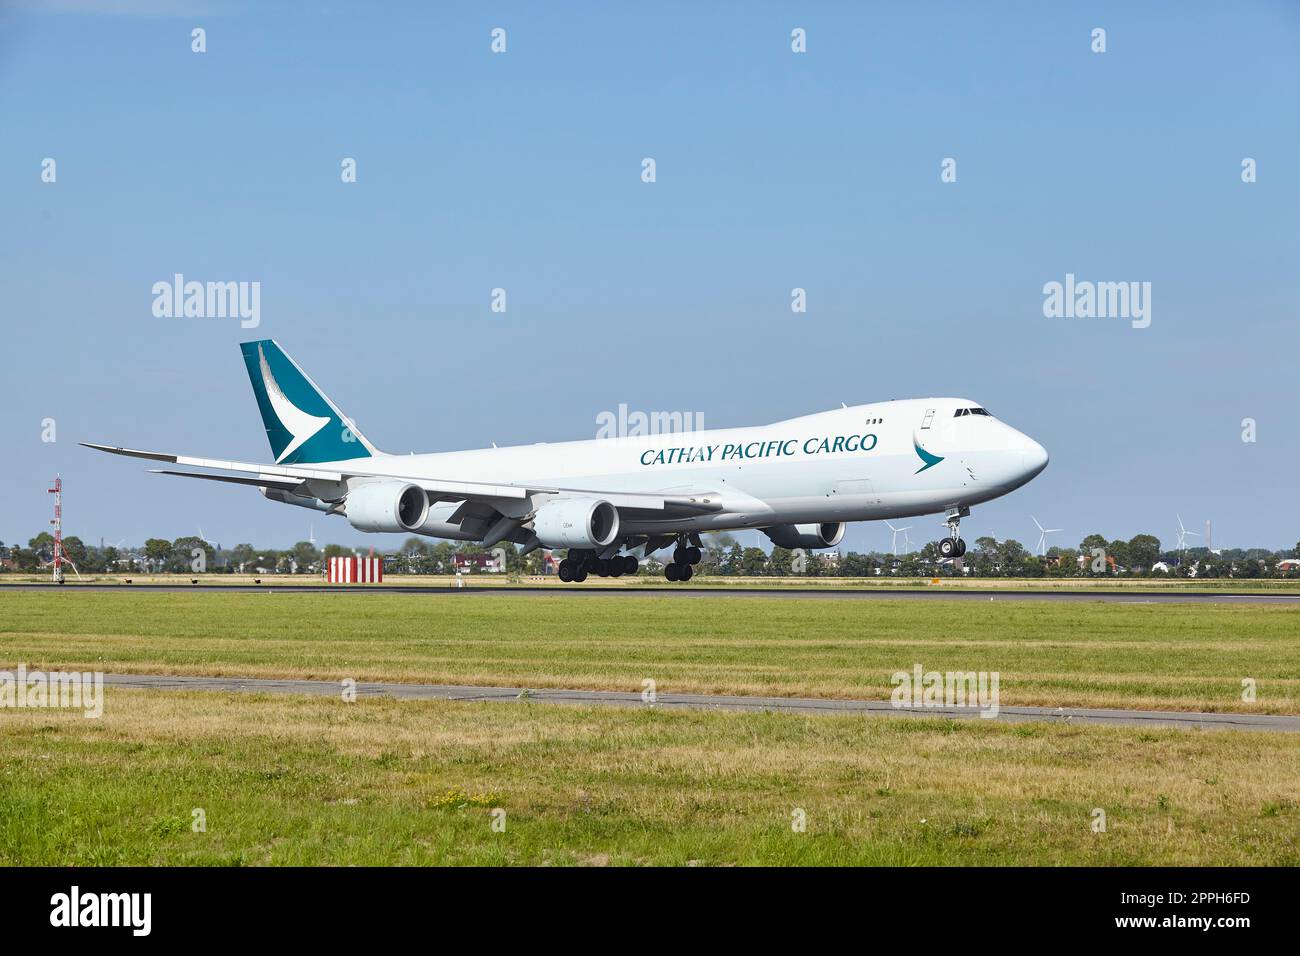 Amsterdam Airport Schiphol - Boeing 747-867F of Cathay Pacific Cargo lands Stock Photo